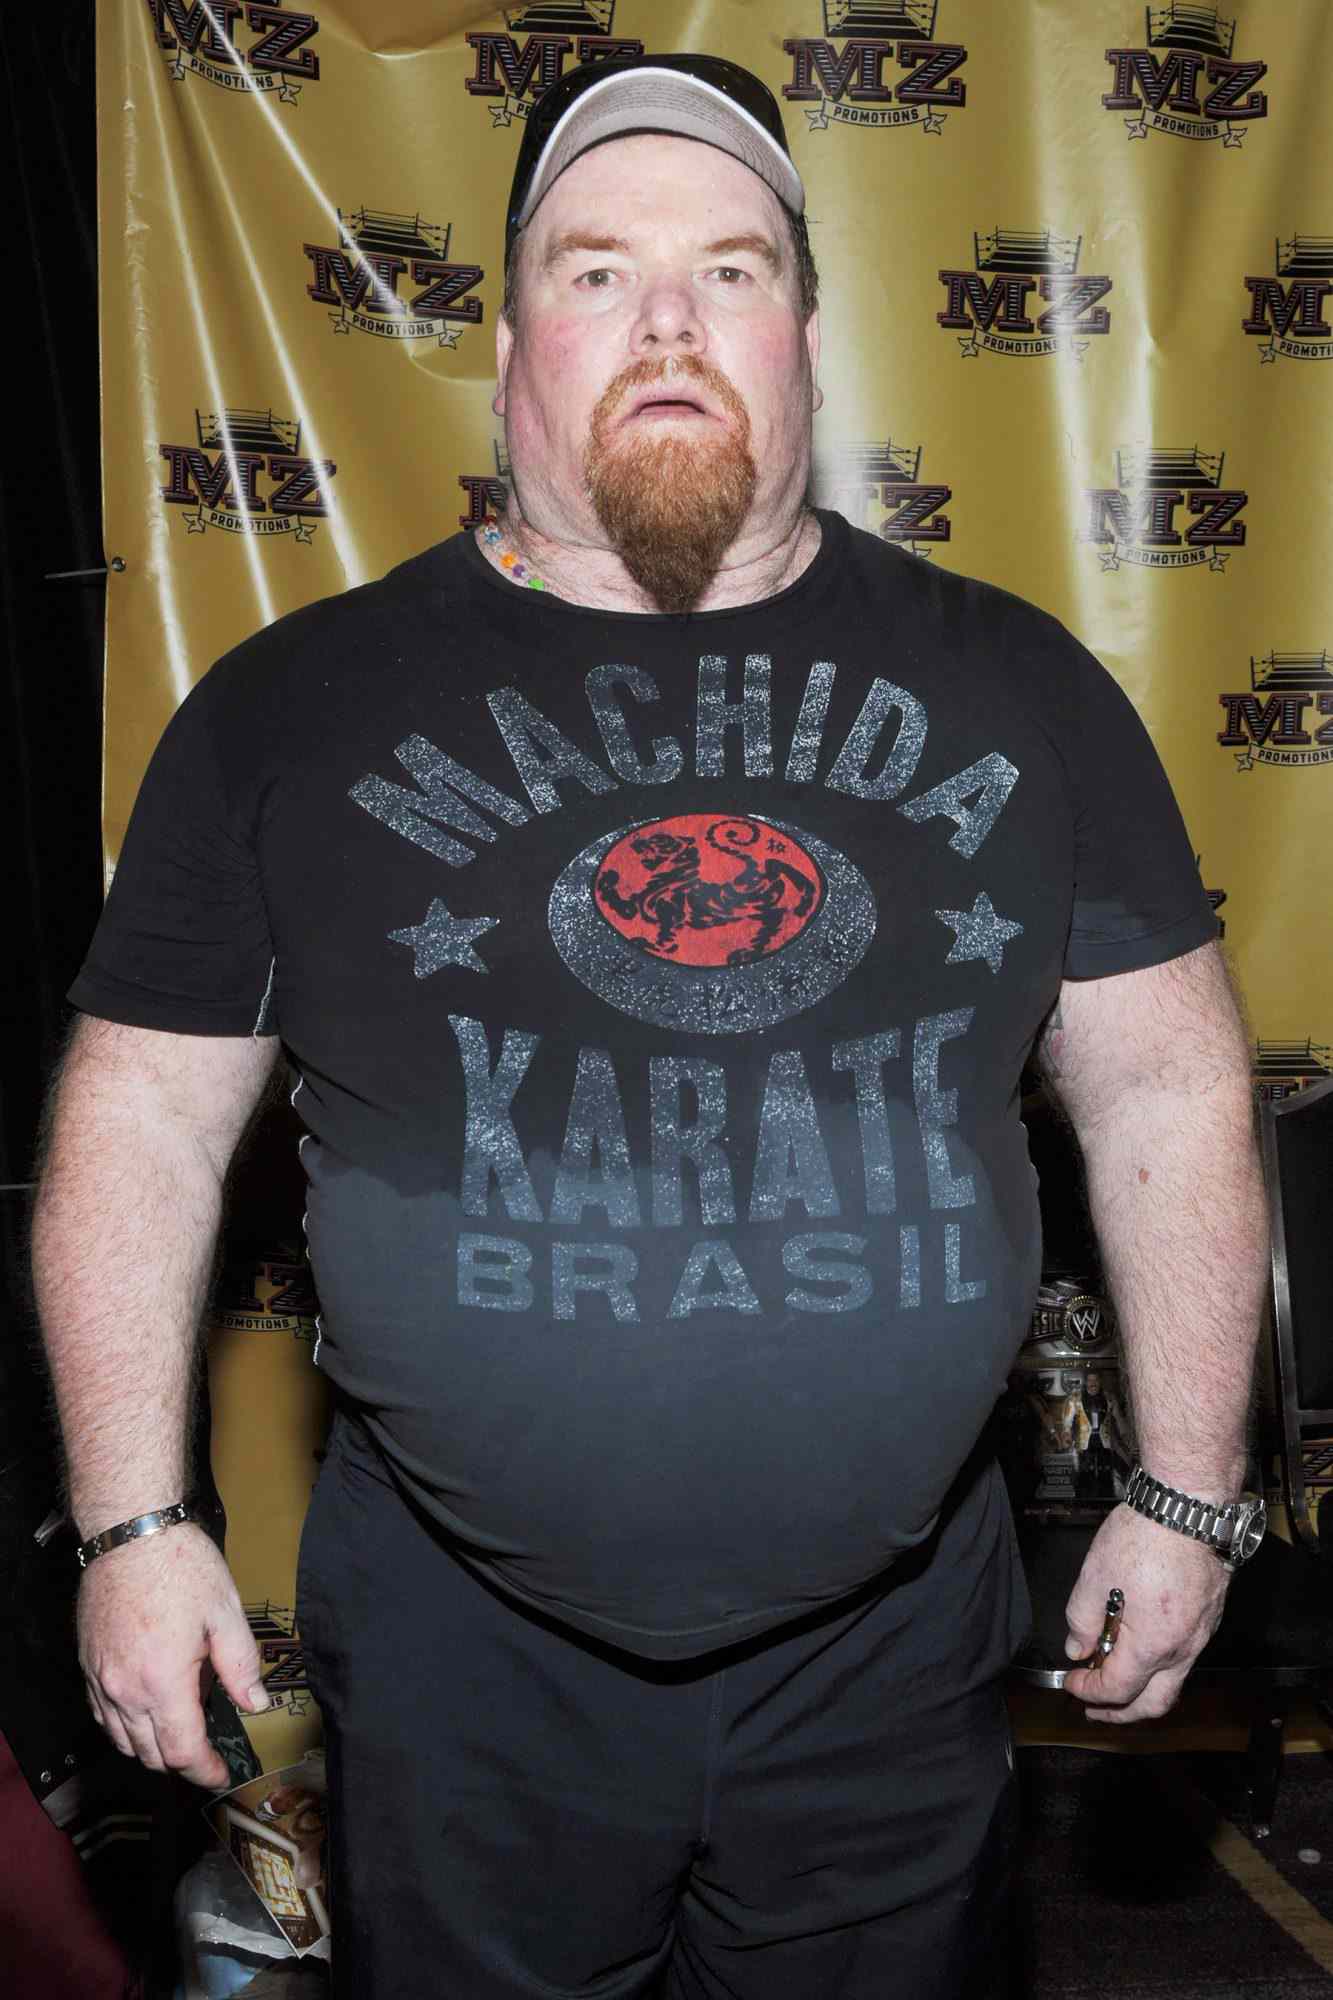 <p>Total Divas star Natalya Neidhart's father has died. WWE legend Jim "The Anvil" Neidhart's death was announced on Aug. 13 by his friend B Brian Blair. He was 63.</p>
                            <p>"So sad to announce the passing of my friend and longtime colleague, Jim 'The Anvil' Neidhart. Your thoughts and prayers for the family are deeply appreciated!" he tweeted.</p>
                            